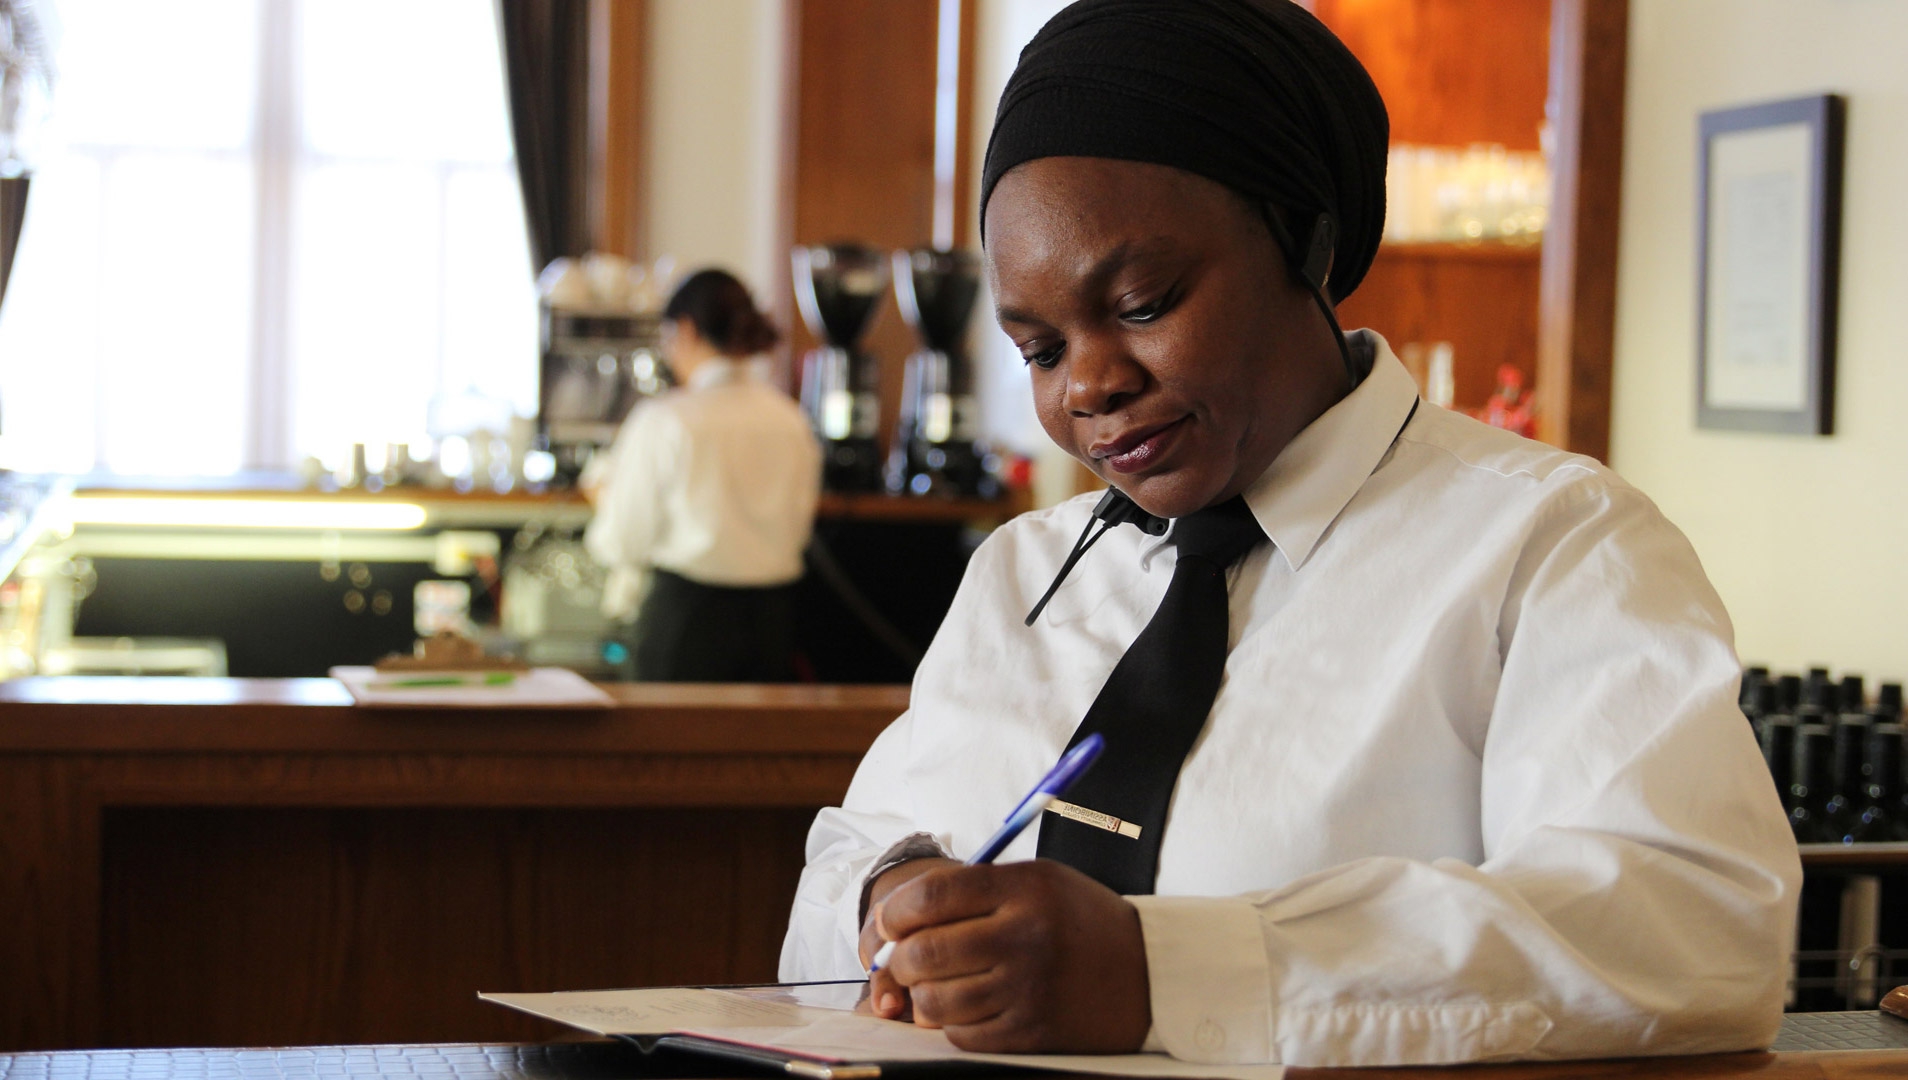 A hospitality business management student in a white shirt and a tie writing notes while standing behind the counter.